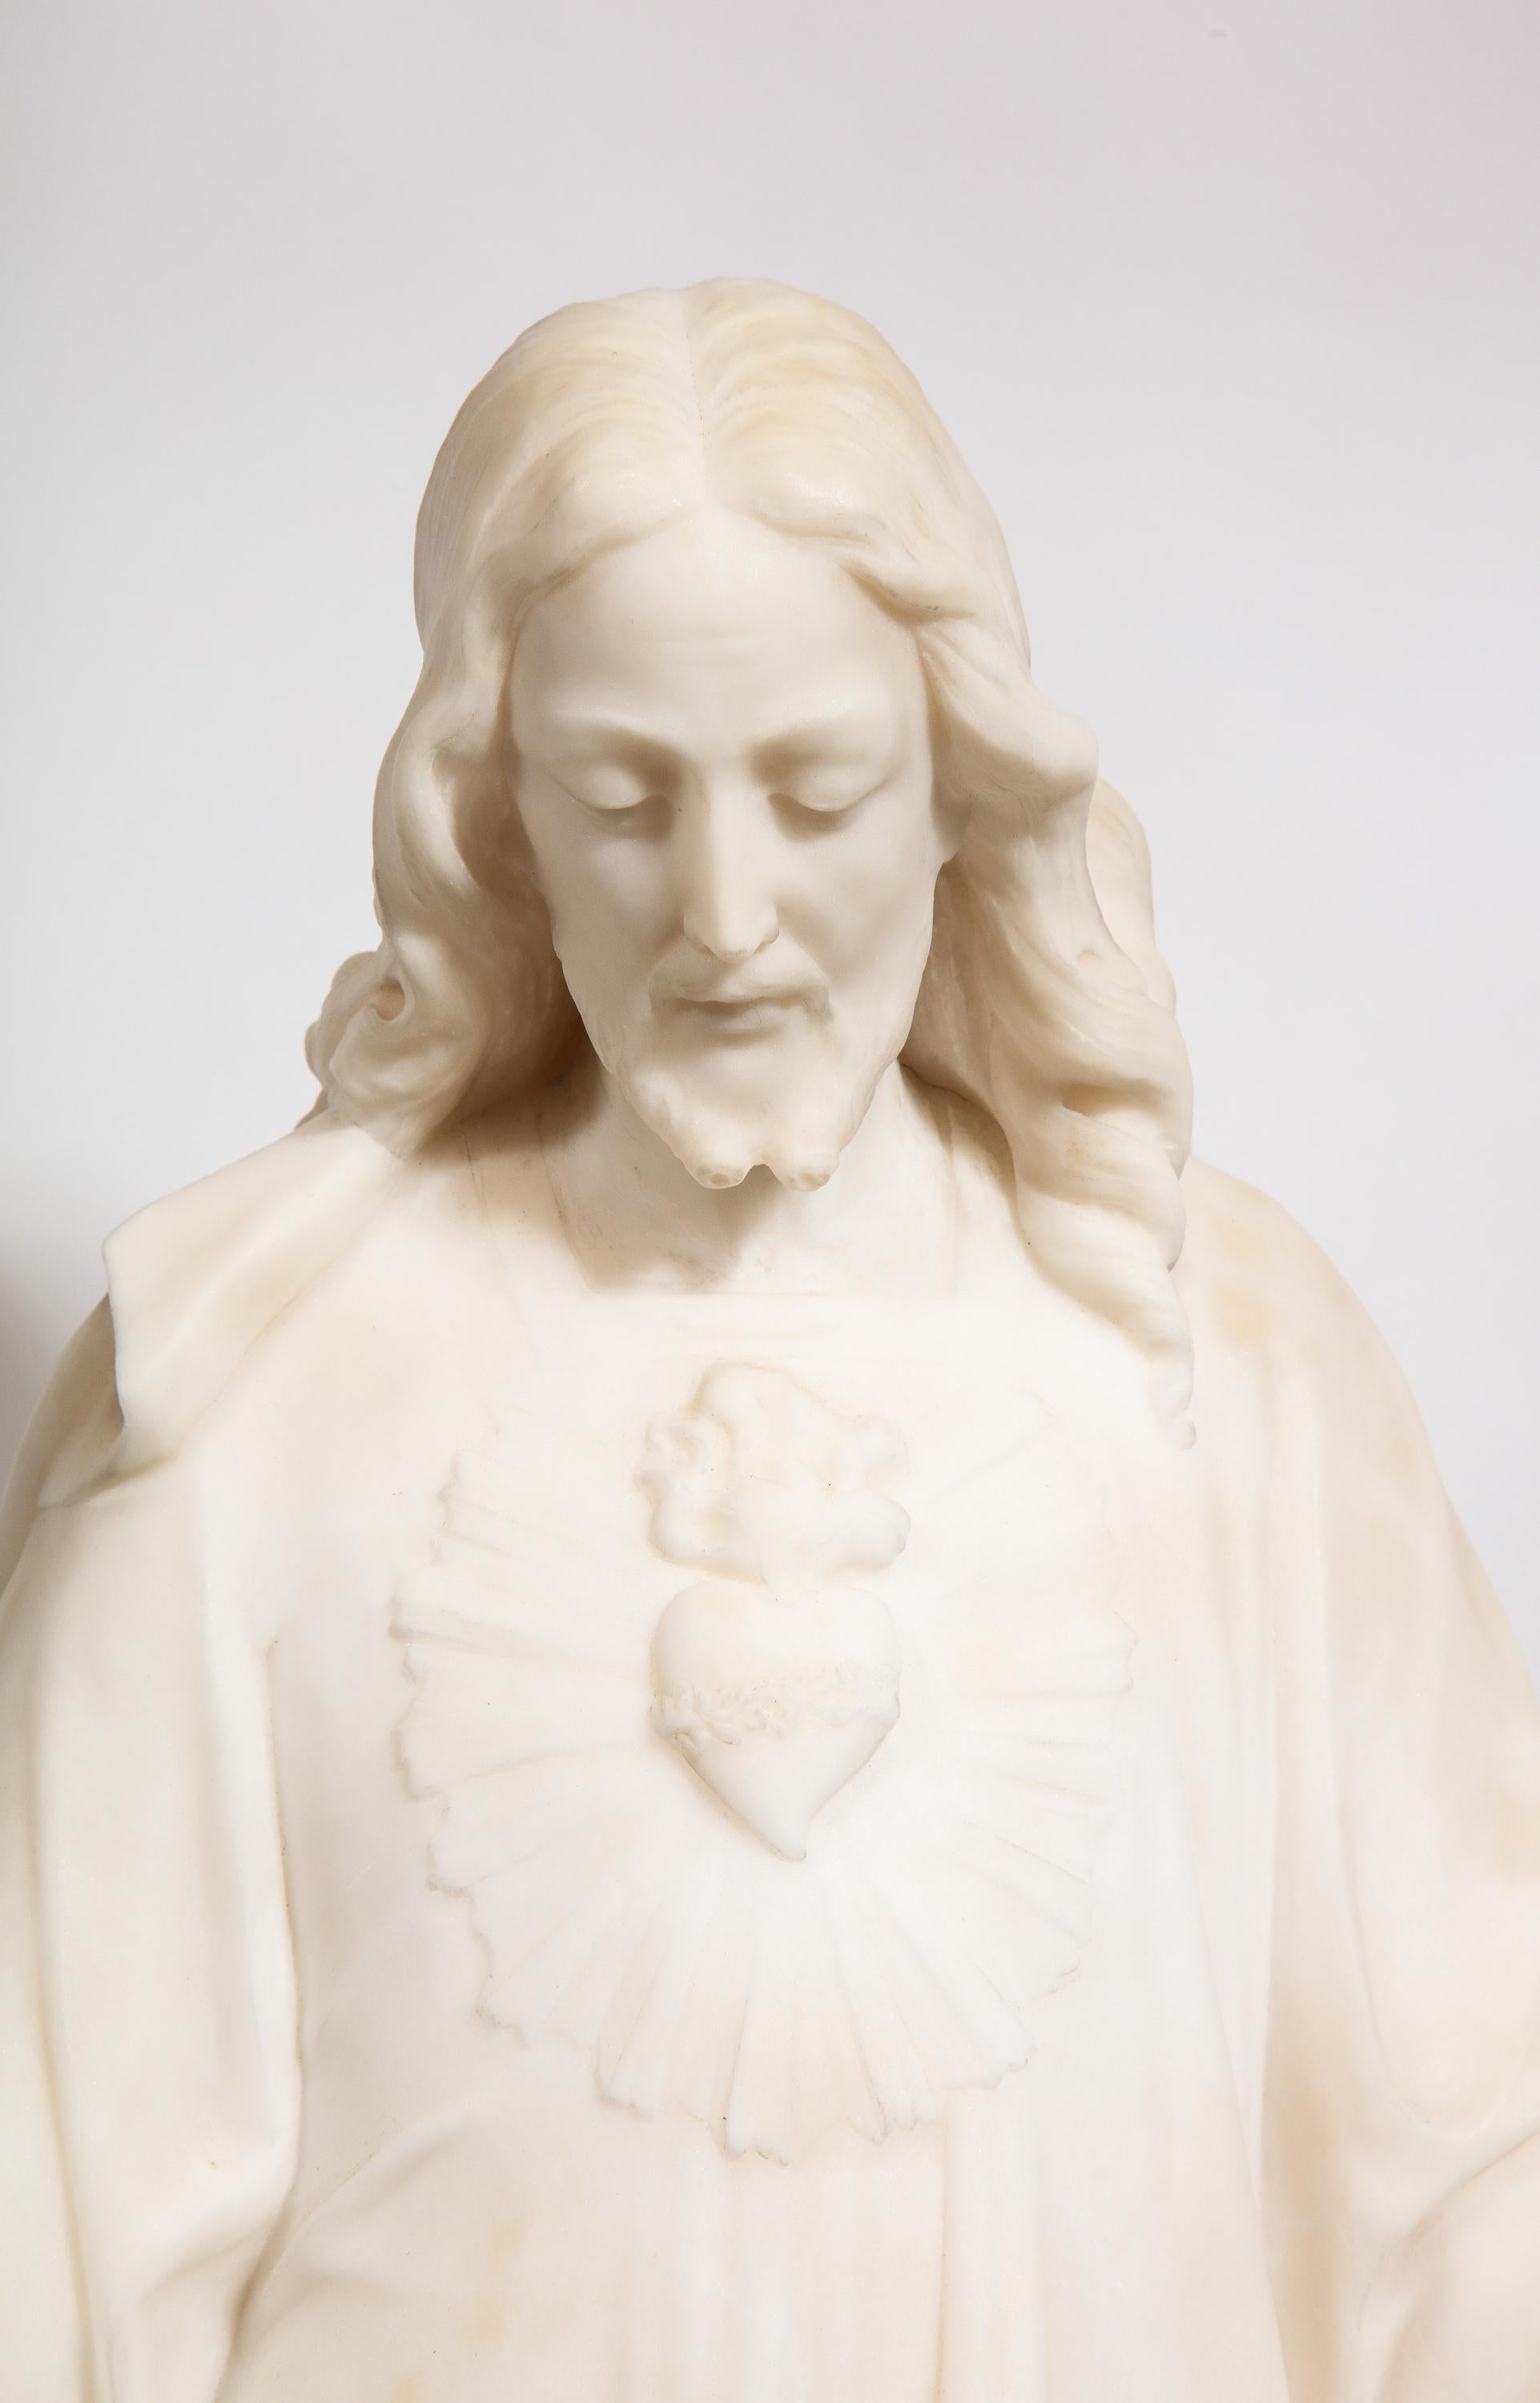 Italian Marble Sculpture of Holy Jesus Christ, 19th Century - Beige Figurative Sculpture by Unknown